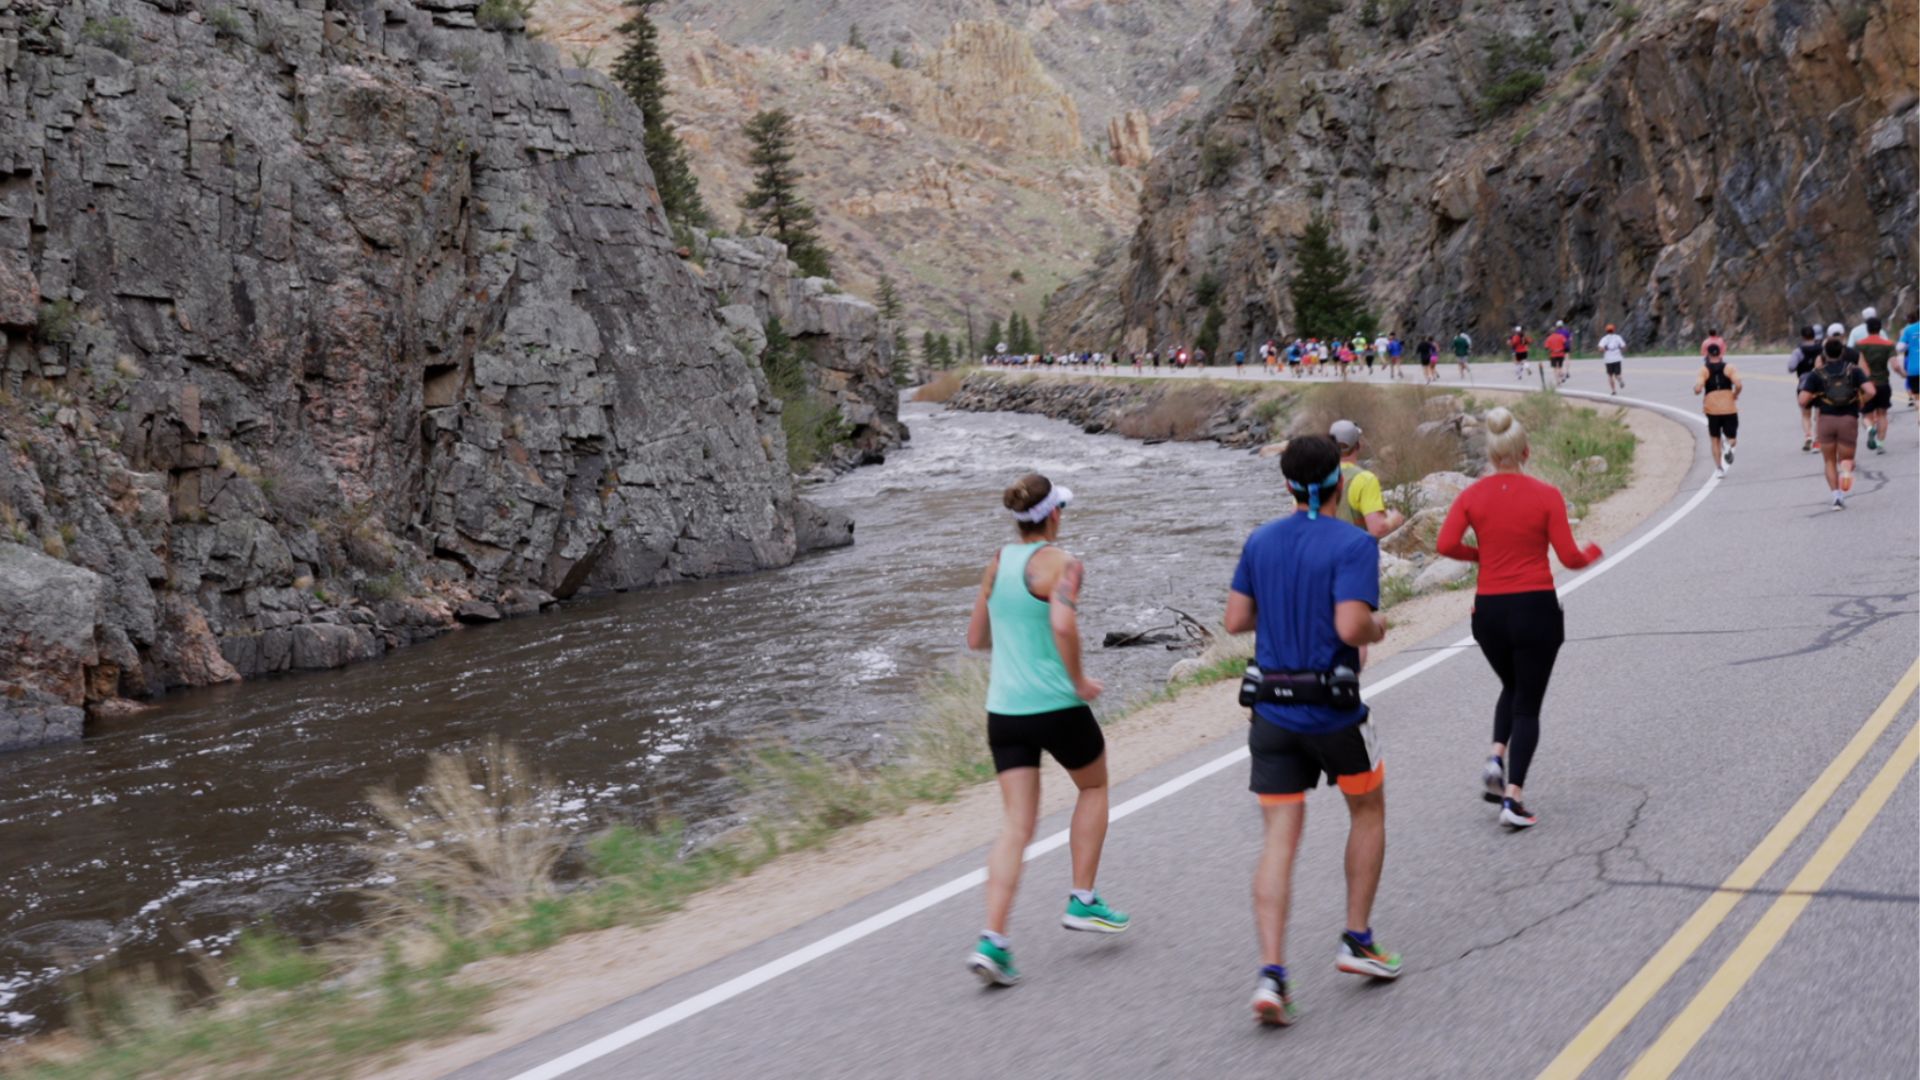 Marathon runners in the Poudre Canyon